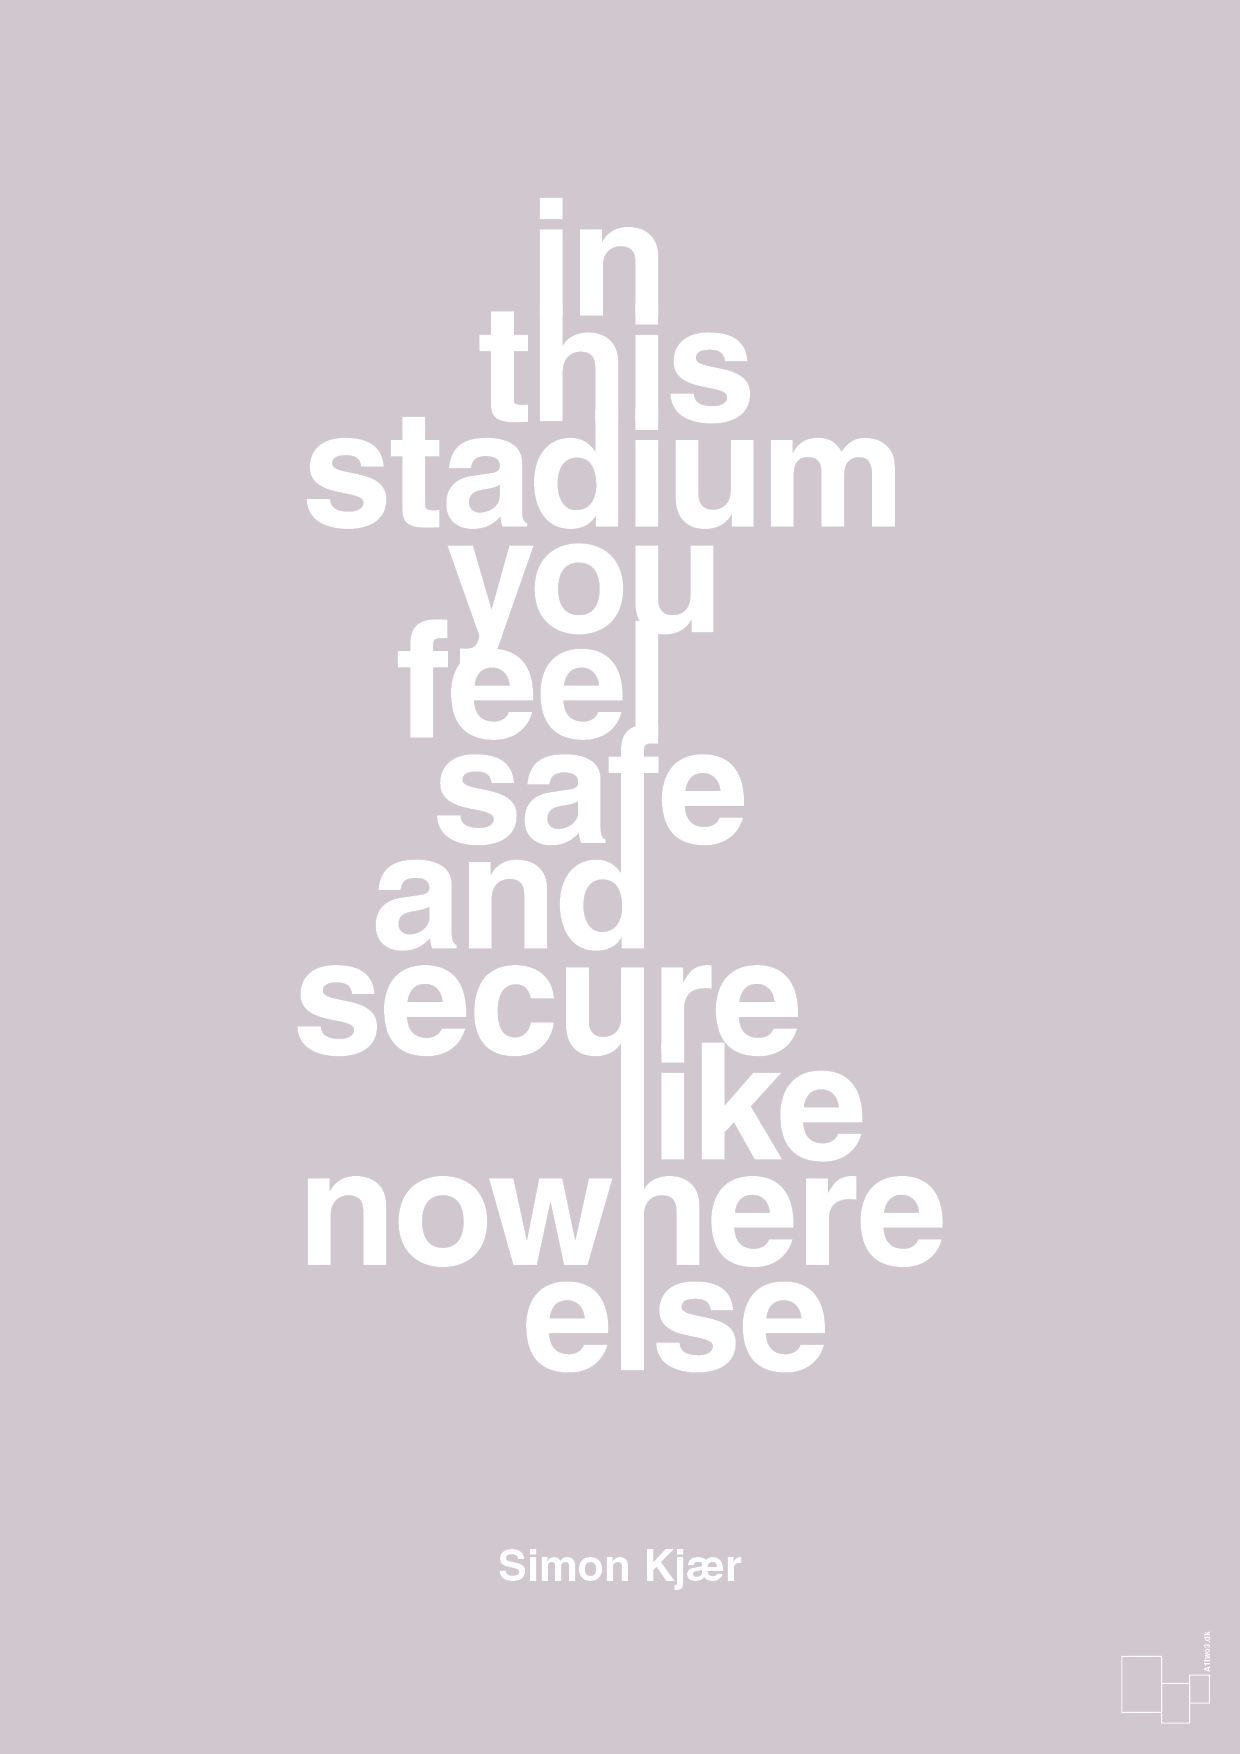 in this stadium you feel safe and secure like nowhere else - Plakat med Citater i Dusty Lilac